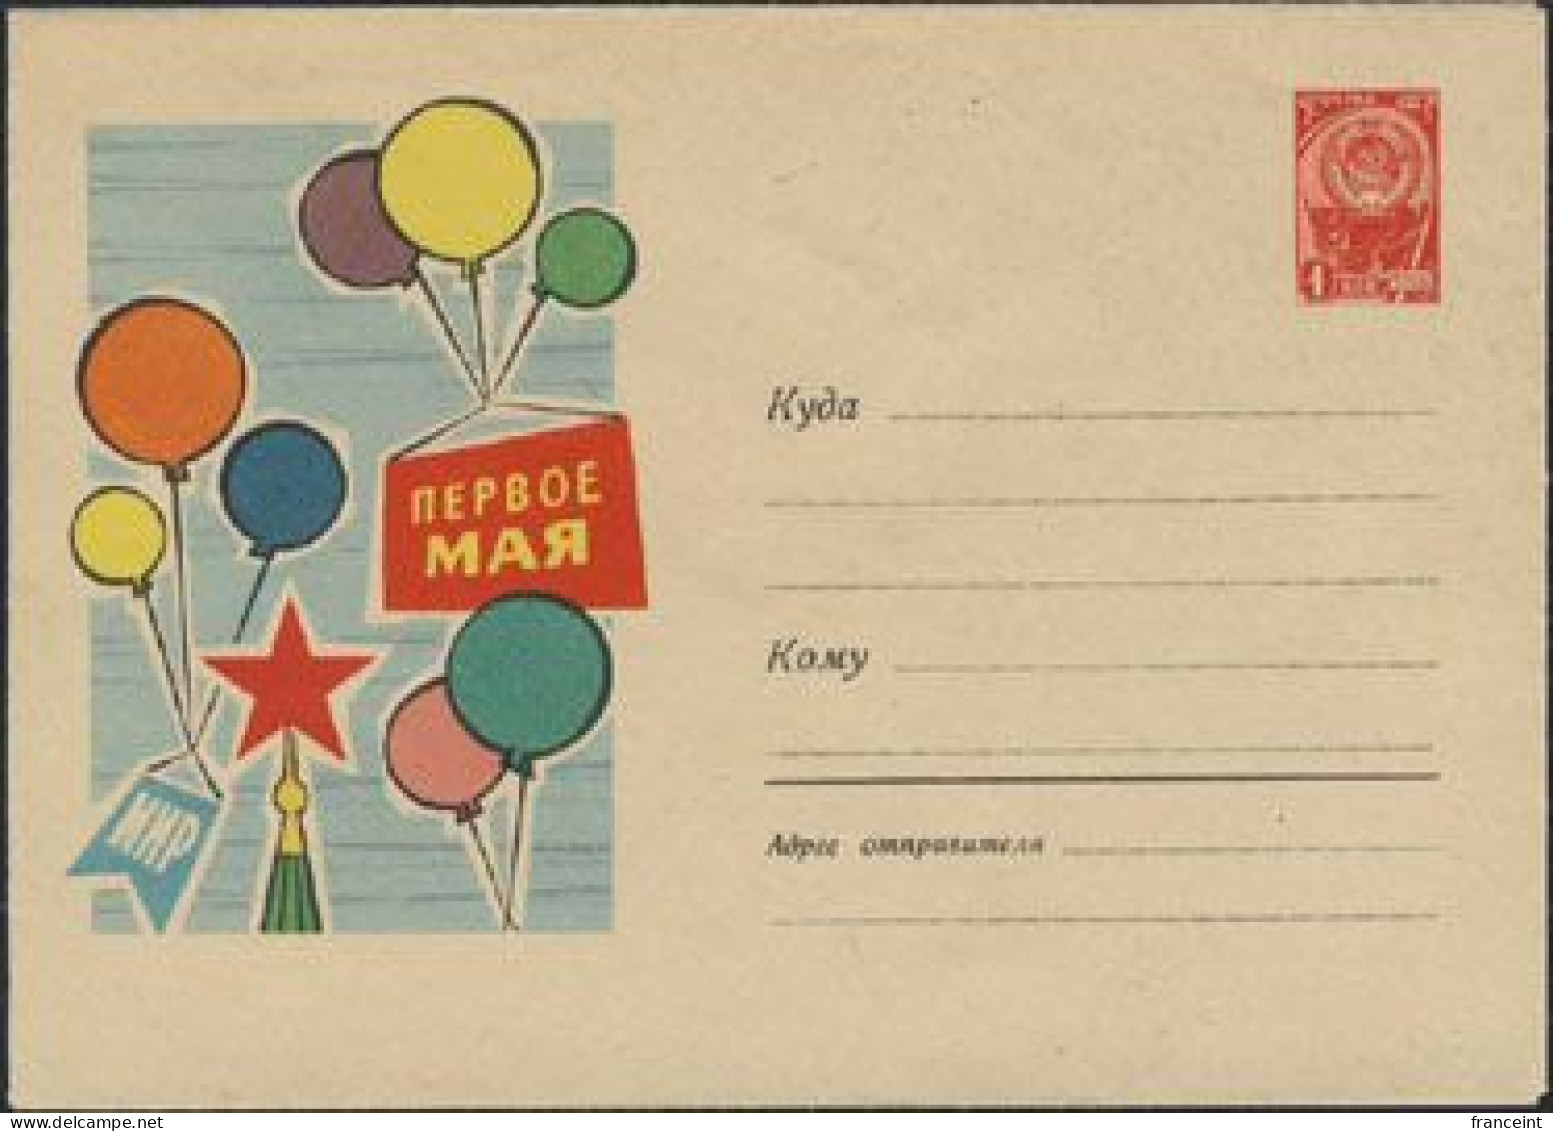 RUSSIA(1961) Balloons. Illustrated Postal Stationery For May 1 Celebration. - 1960-69